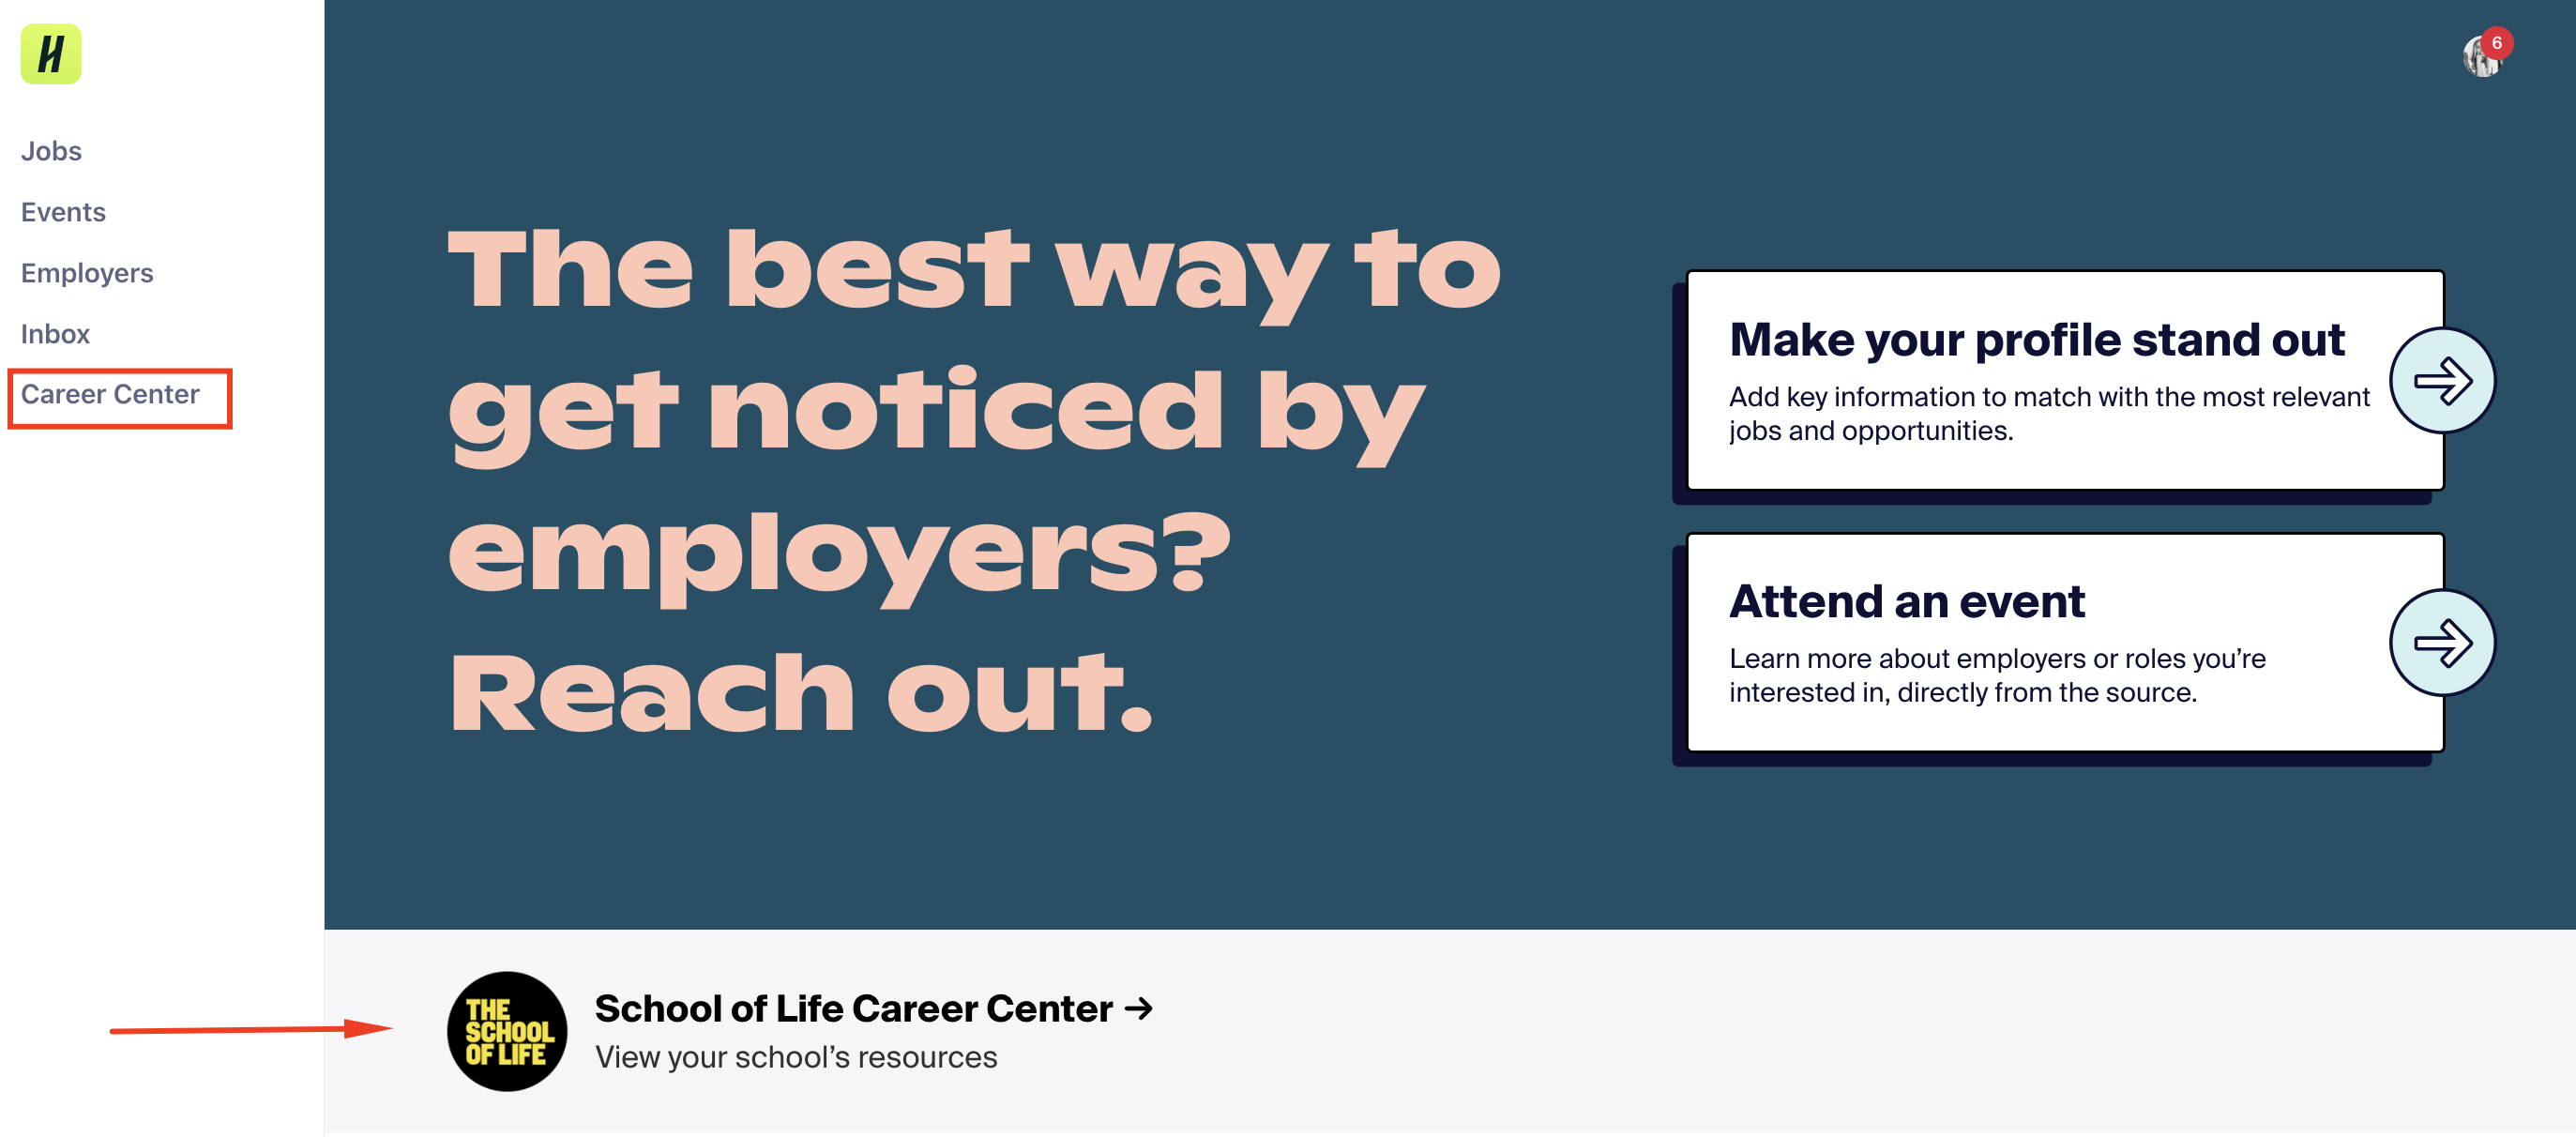 Access_Career_Center_Image.png